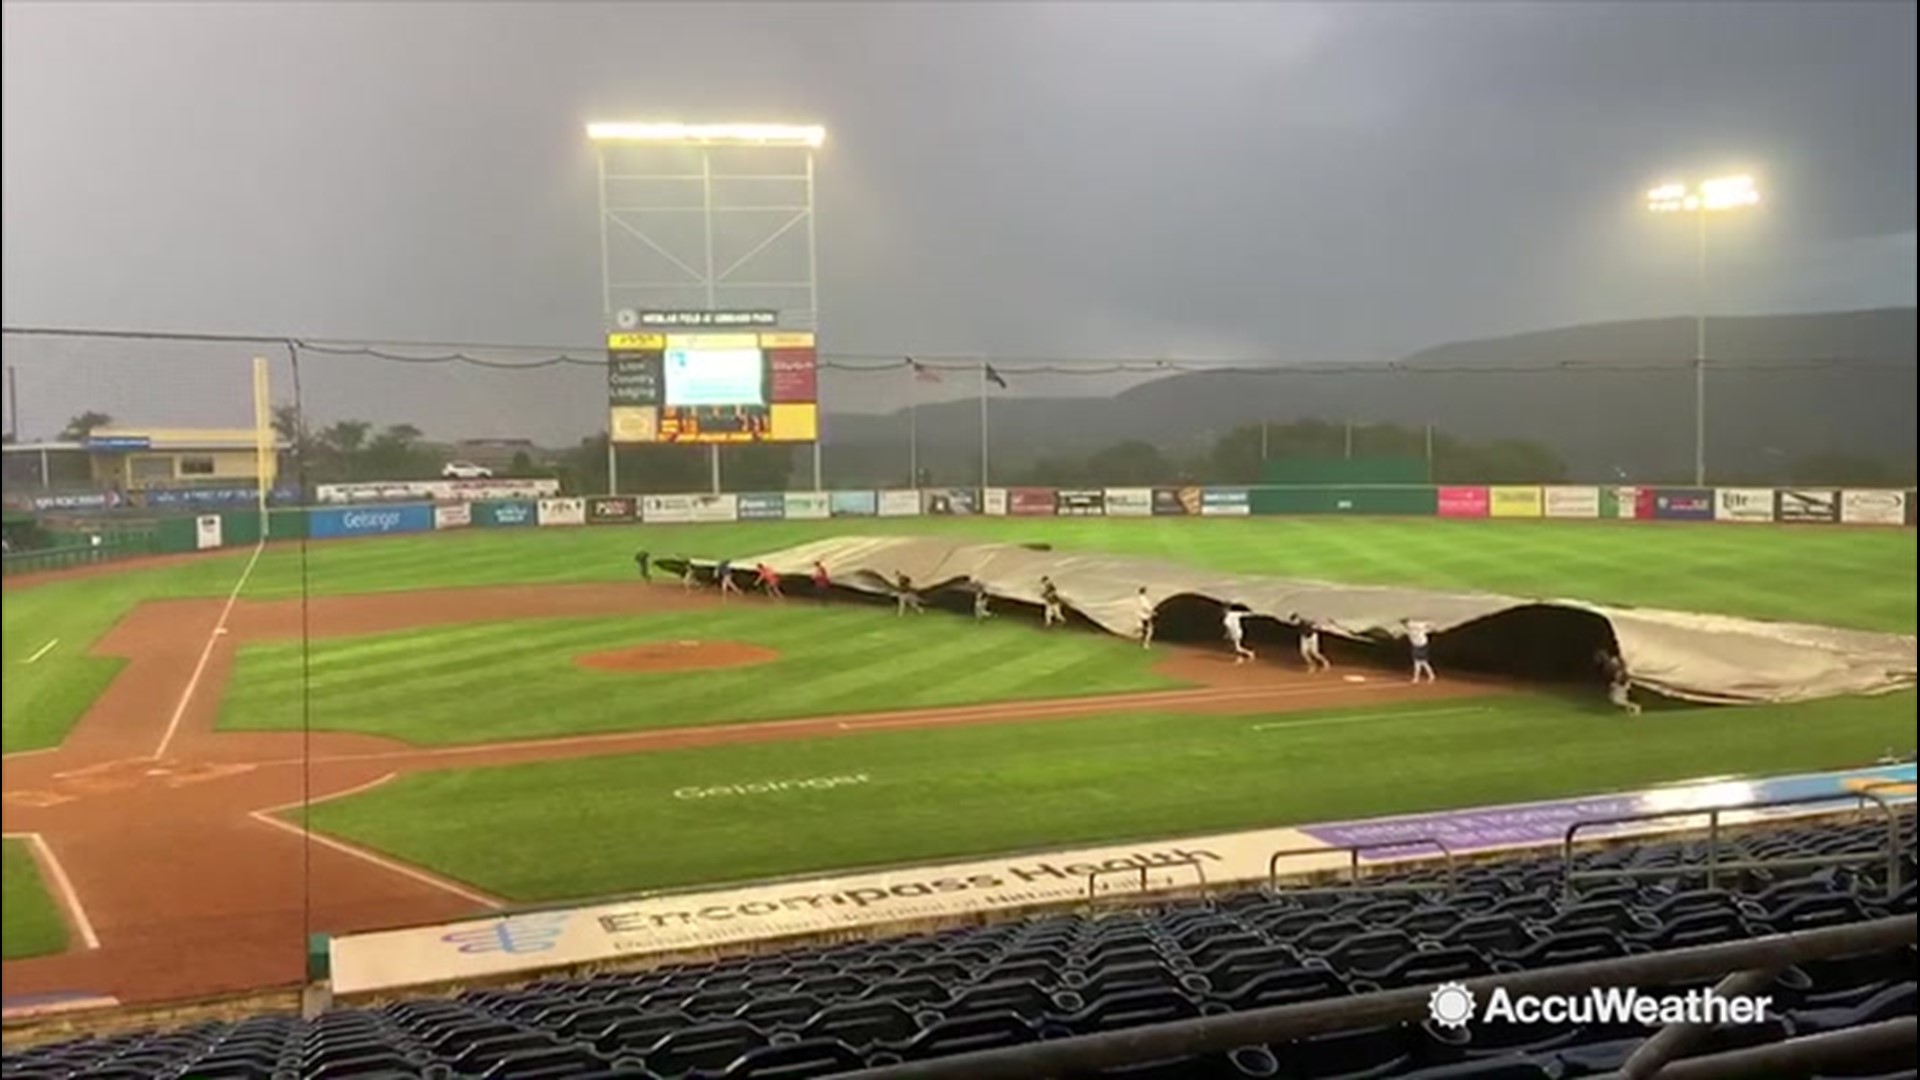 In this video, we sped up the staff at the Medlar Field at Lubrano Park, home of the State College Spikes, in the process of covering the field with a huge tarp to protect it from the rain as a storm intrudes on the game in State College, Pennsylvania, on Aug. 14.